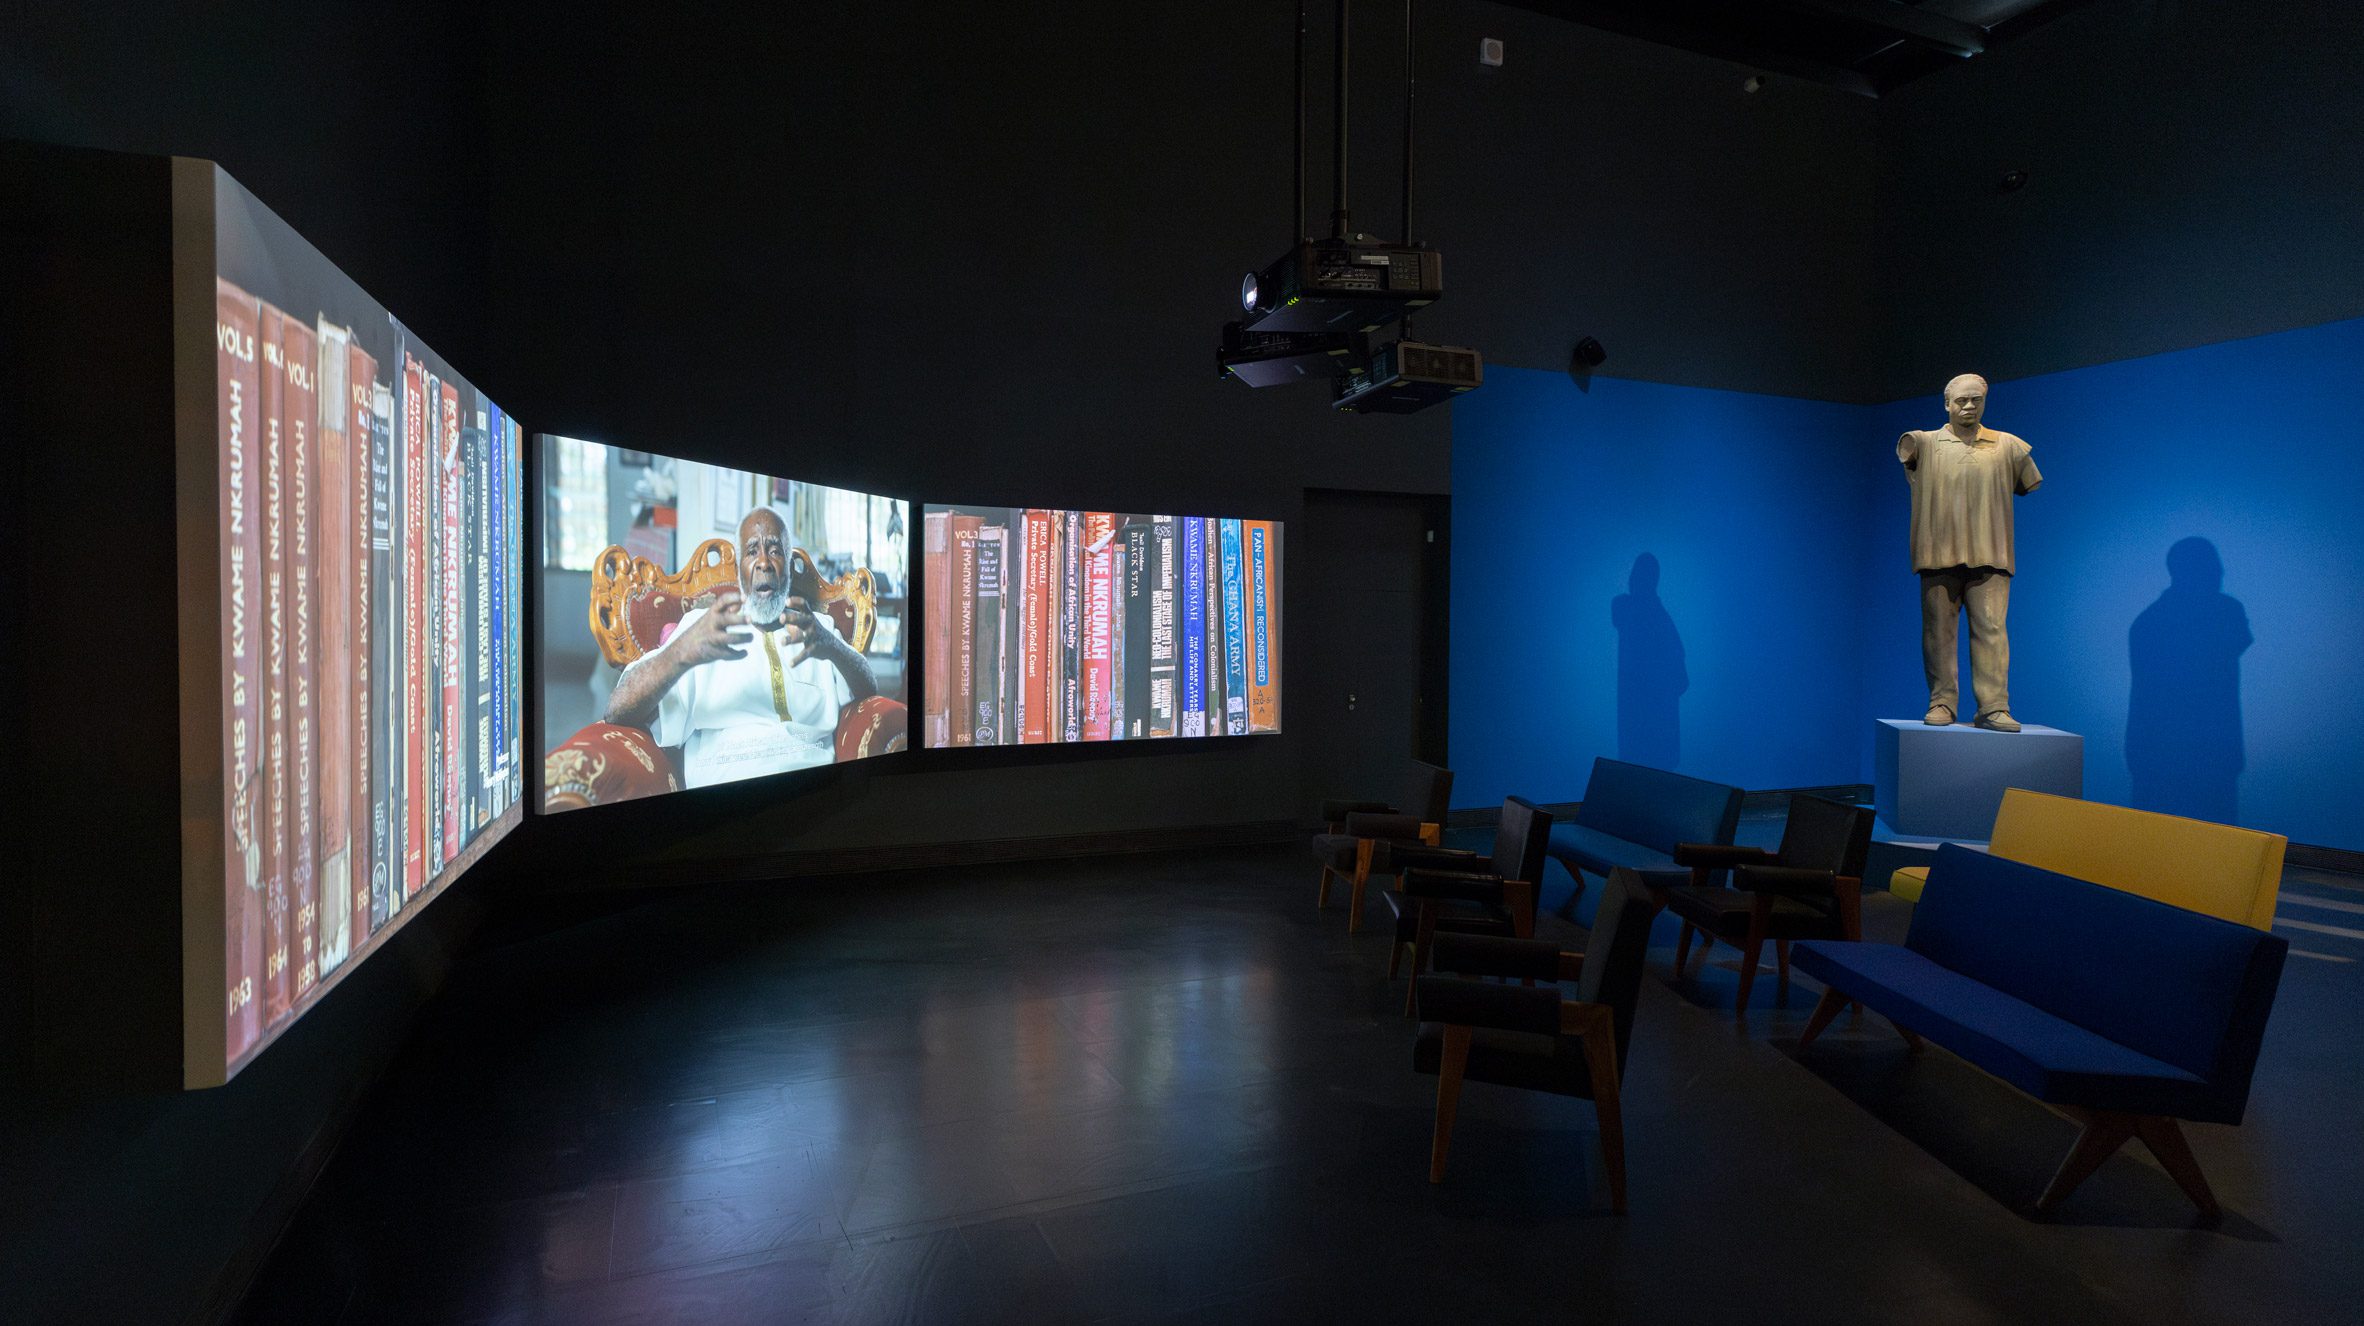 Image of video used in the Tropical Modernism exhibition at the V&A London